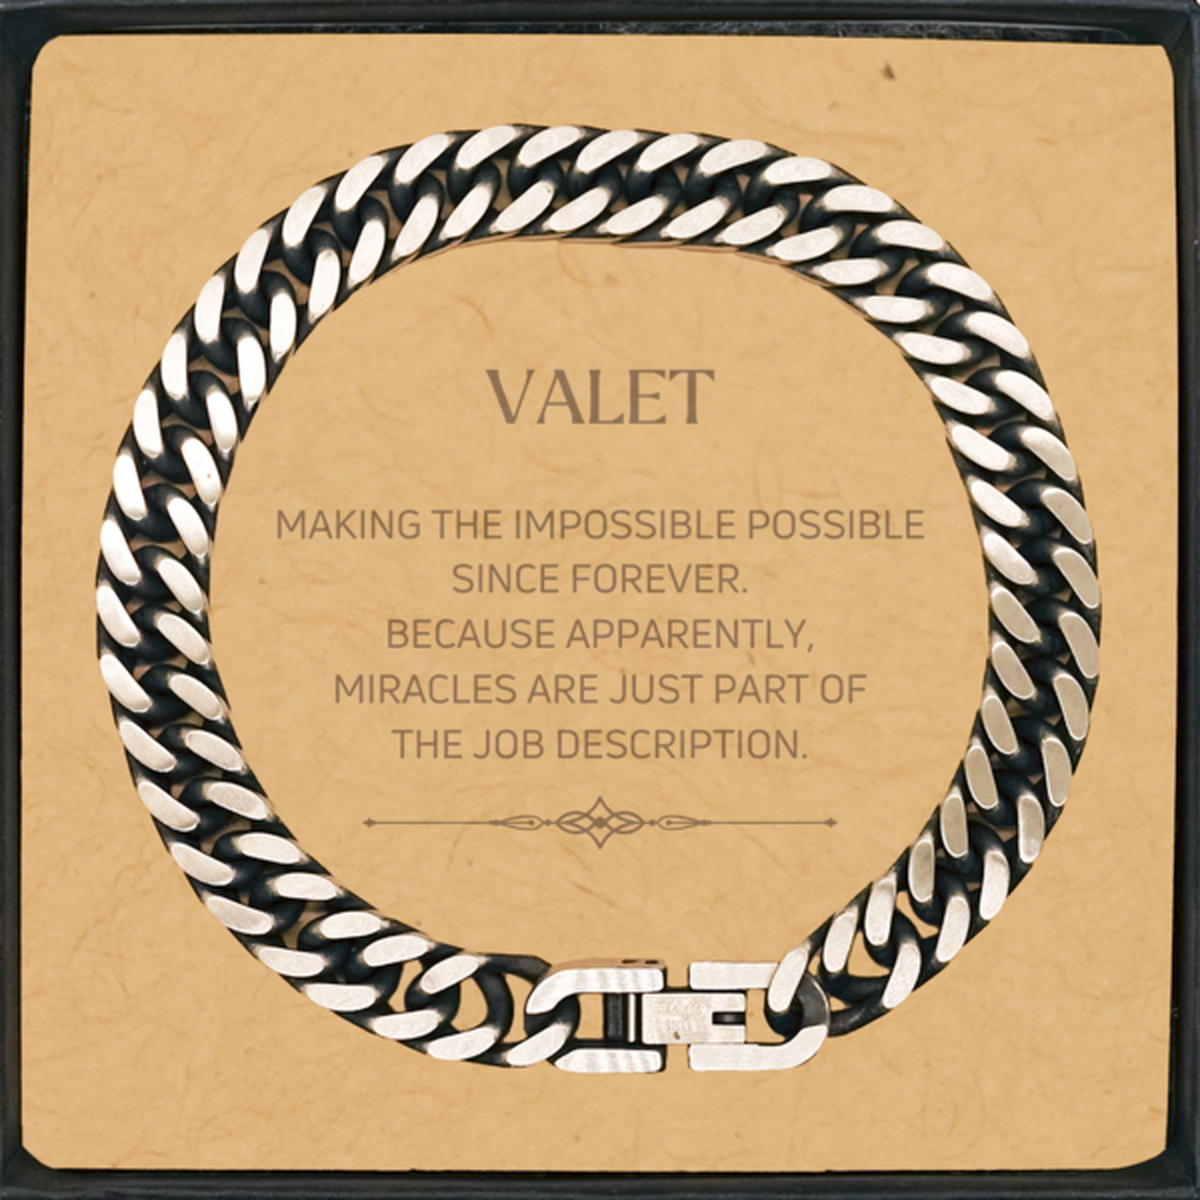 Funny Valet Gifts, Miracles are just part of the job description, Inspirational Birthday Cuban Link Chain Bracelet For Valet, Men, Women, Coworkers, Friends, Boss